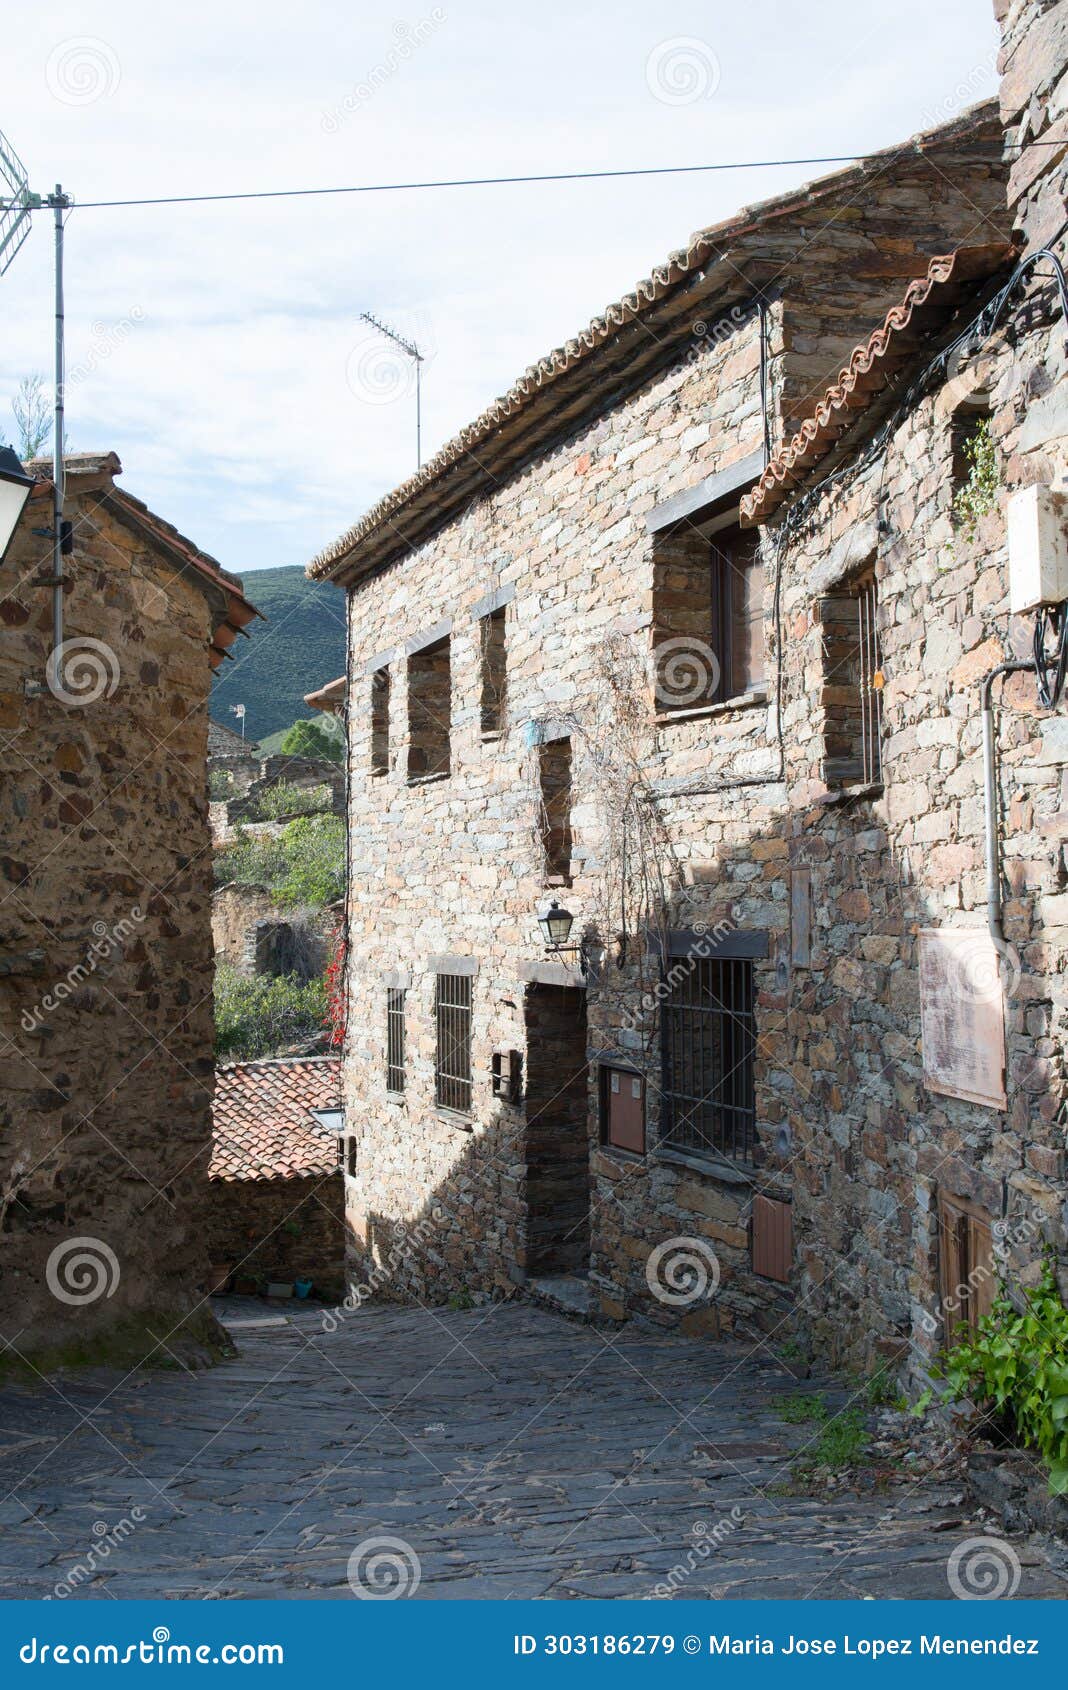 beautiful village, houses with stone walls in patones de arriba, madrid